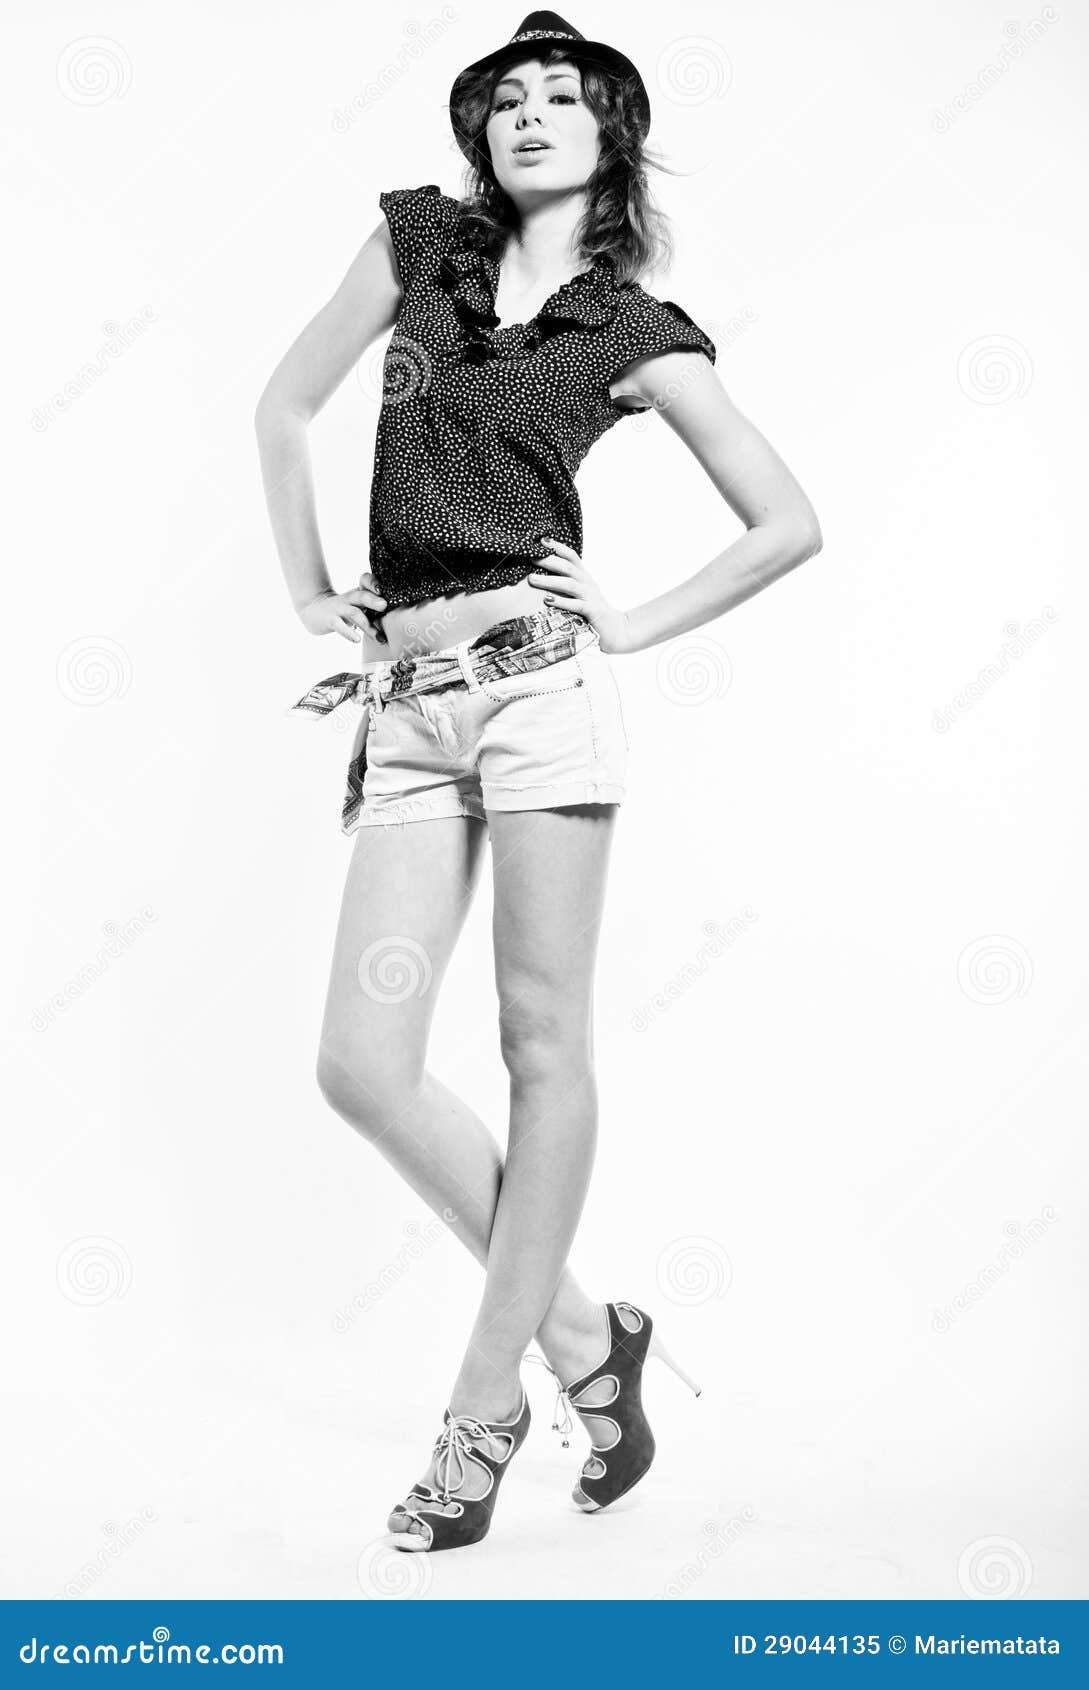 Fashion Girl With Long Legs Royalty Free Stock Photo - Image: 29044135